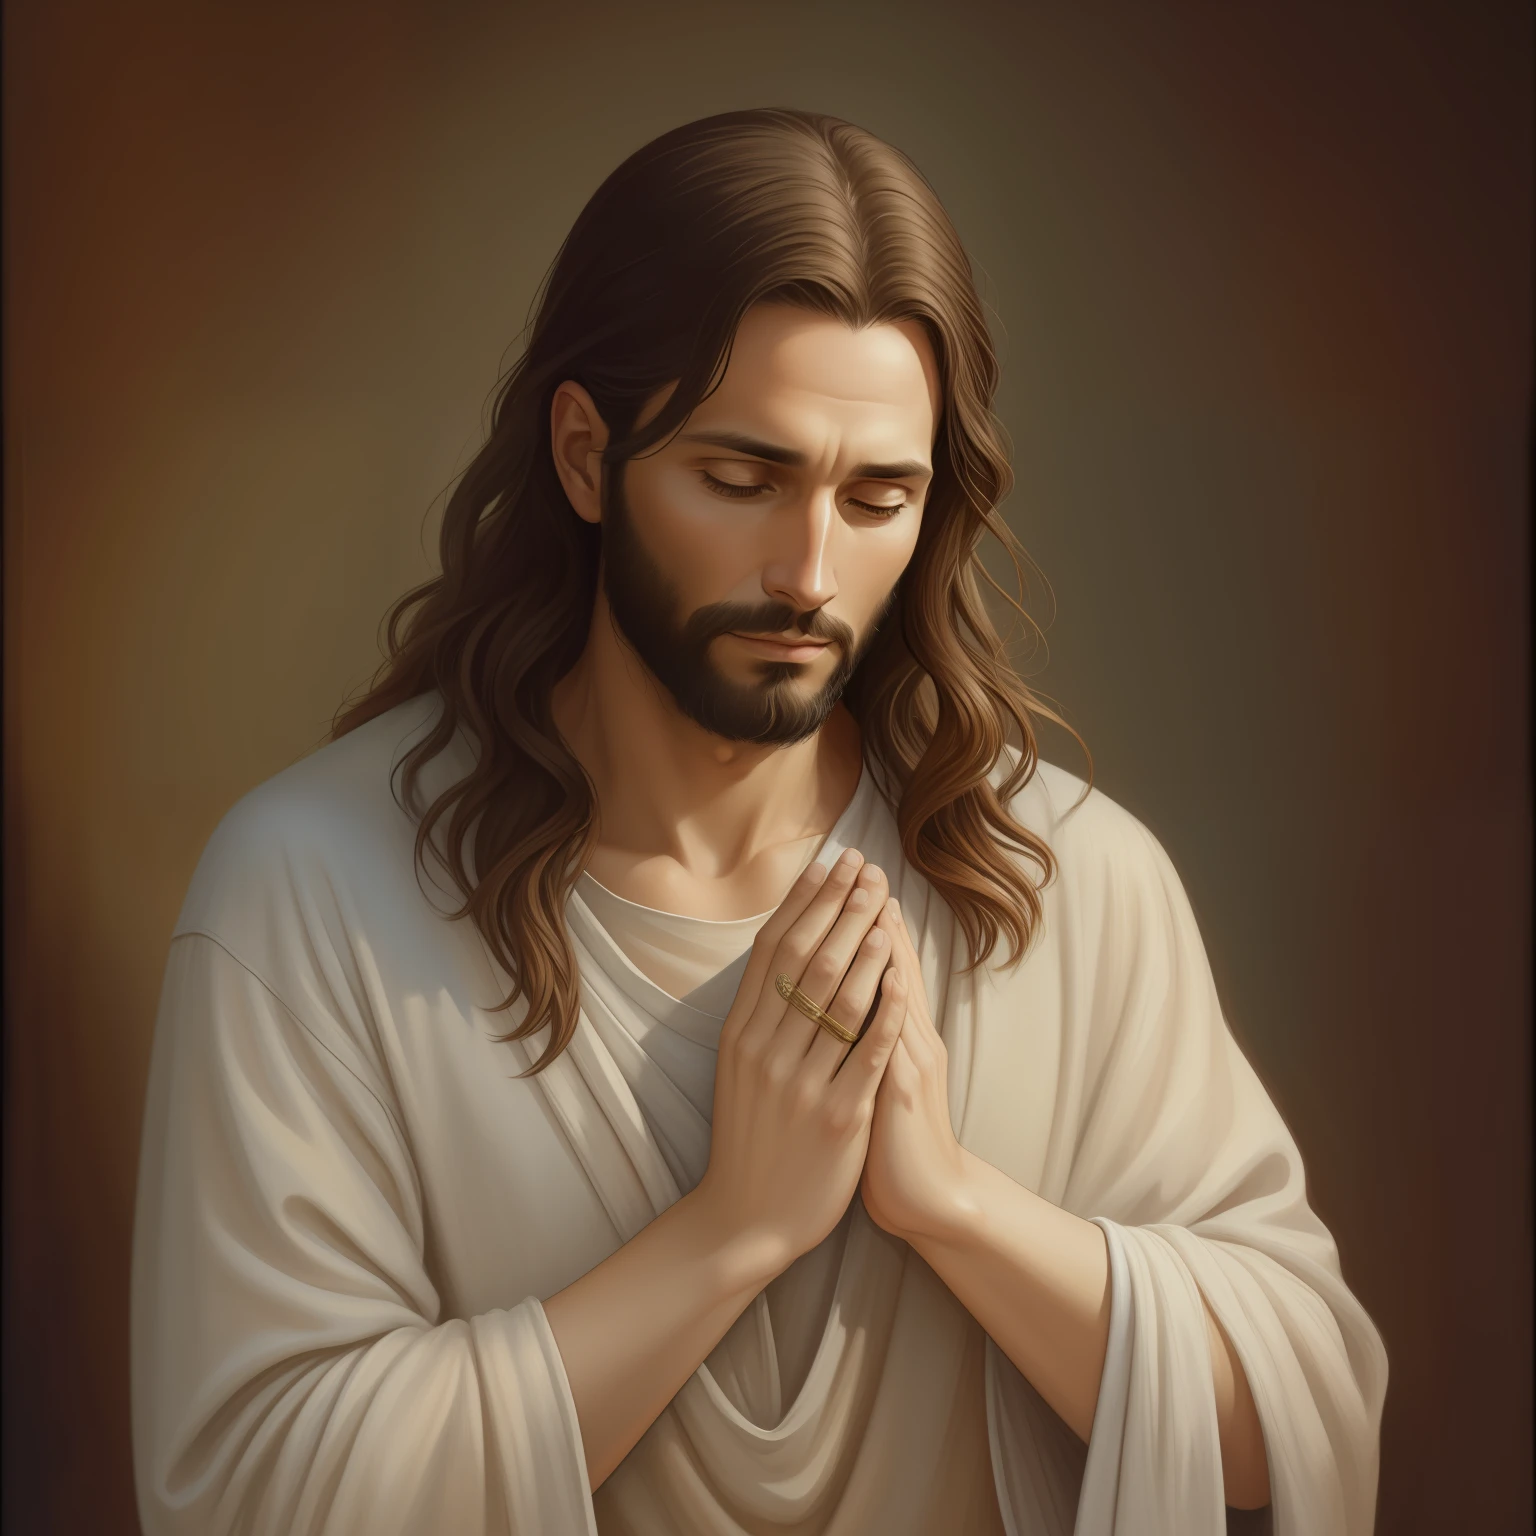 A beautiful ultra-thin realistic portrait of Jesus, the prophet, a man 33 years old Hebrew brunette, short brown hair, long brown beard, wearing long linen tunic closed on the chest part, in front view, full body, biblical, realistic,by Diego Velázquez,Peter Paul Rubens,Rembrandt,Alex Ross,8k, Concept Art, PhotoRealistic, Realistic,  Illustration, Oil Painting, Surrealism, HyperRealistic, pray , Digital art, style, watercolor, natural background, Praying ( Blessing woman)